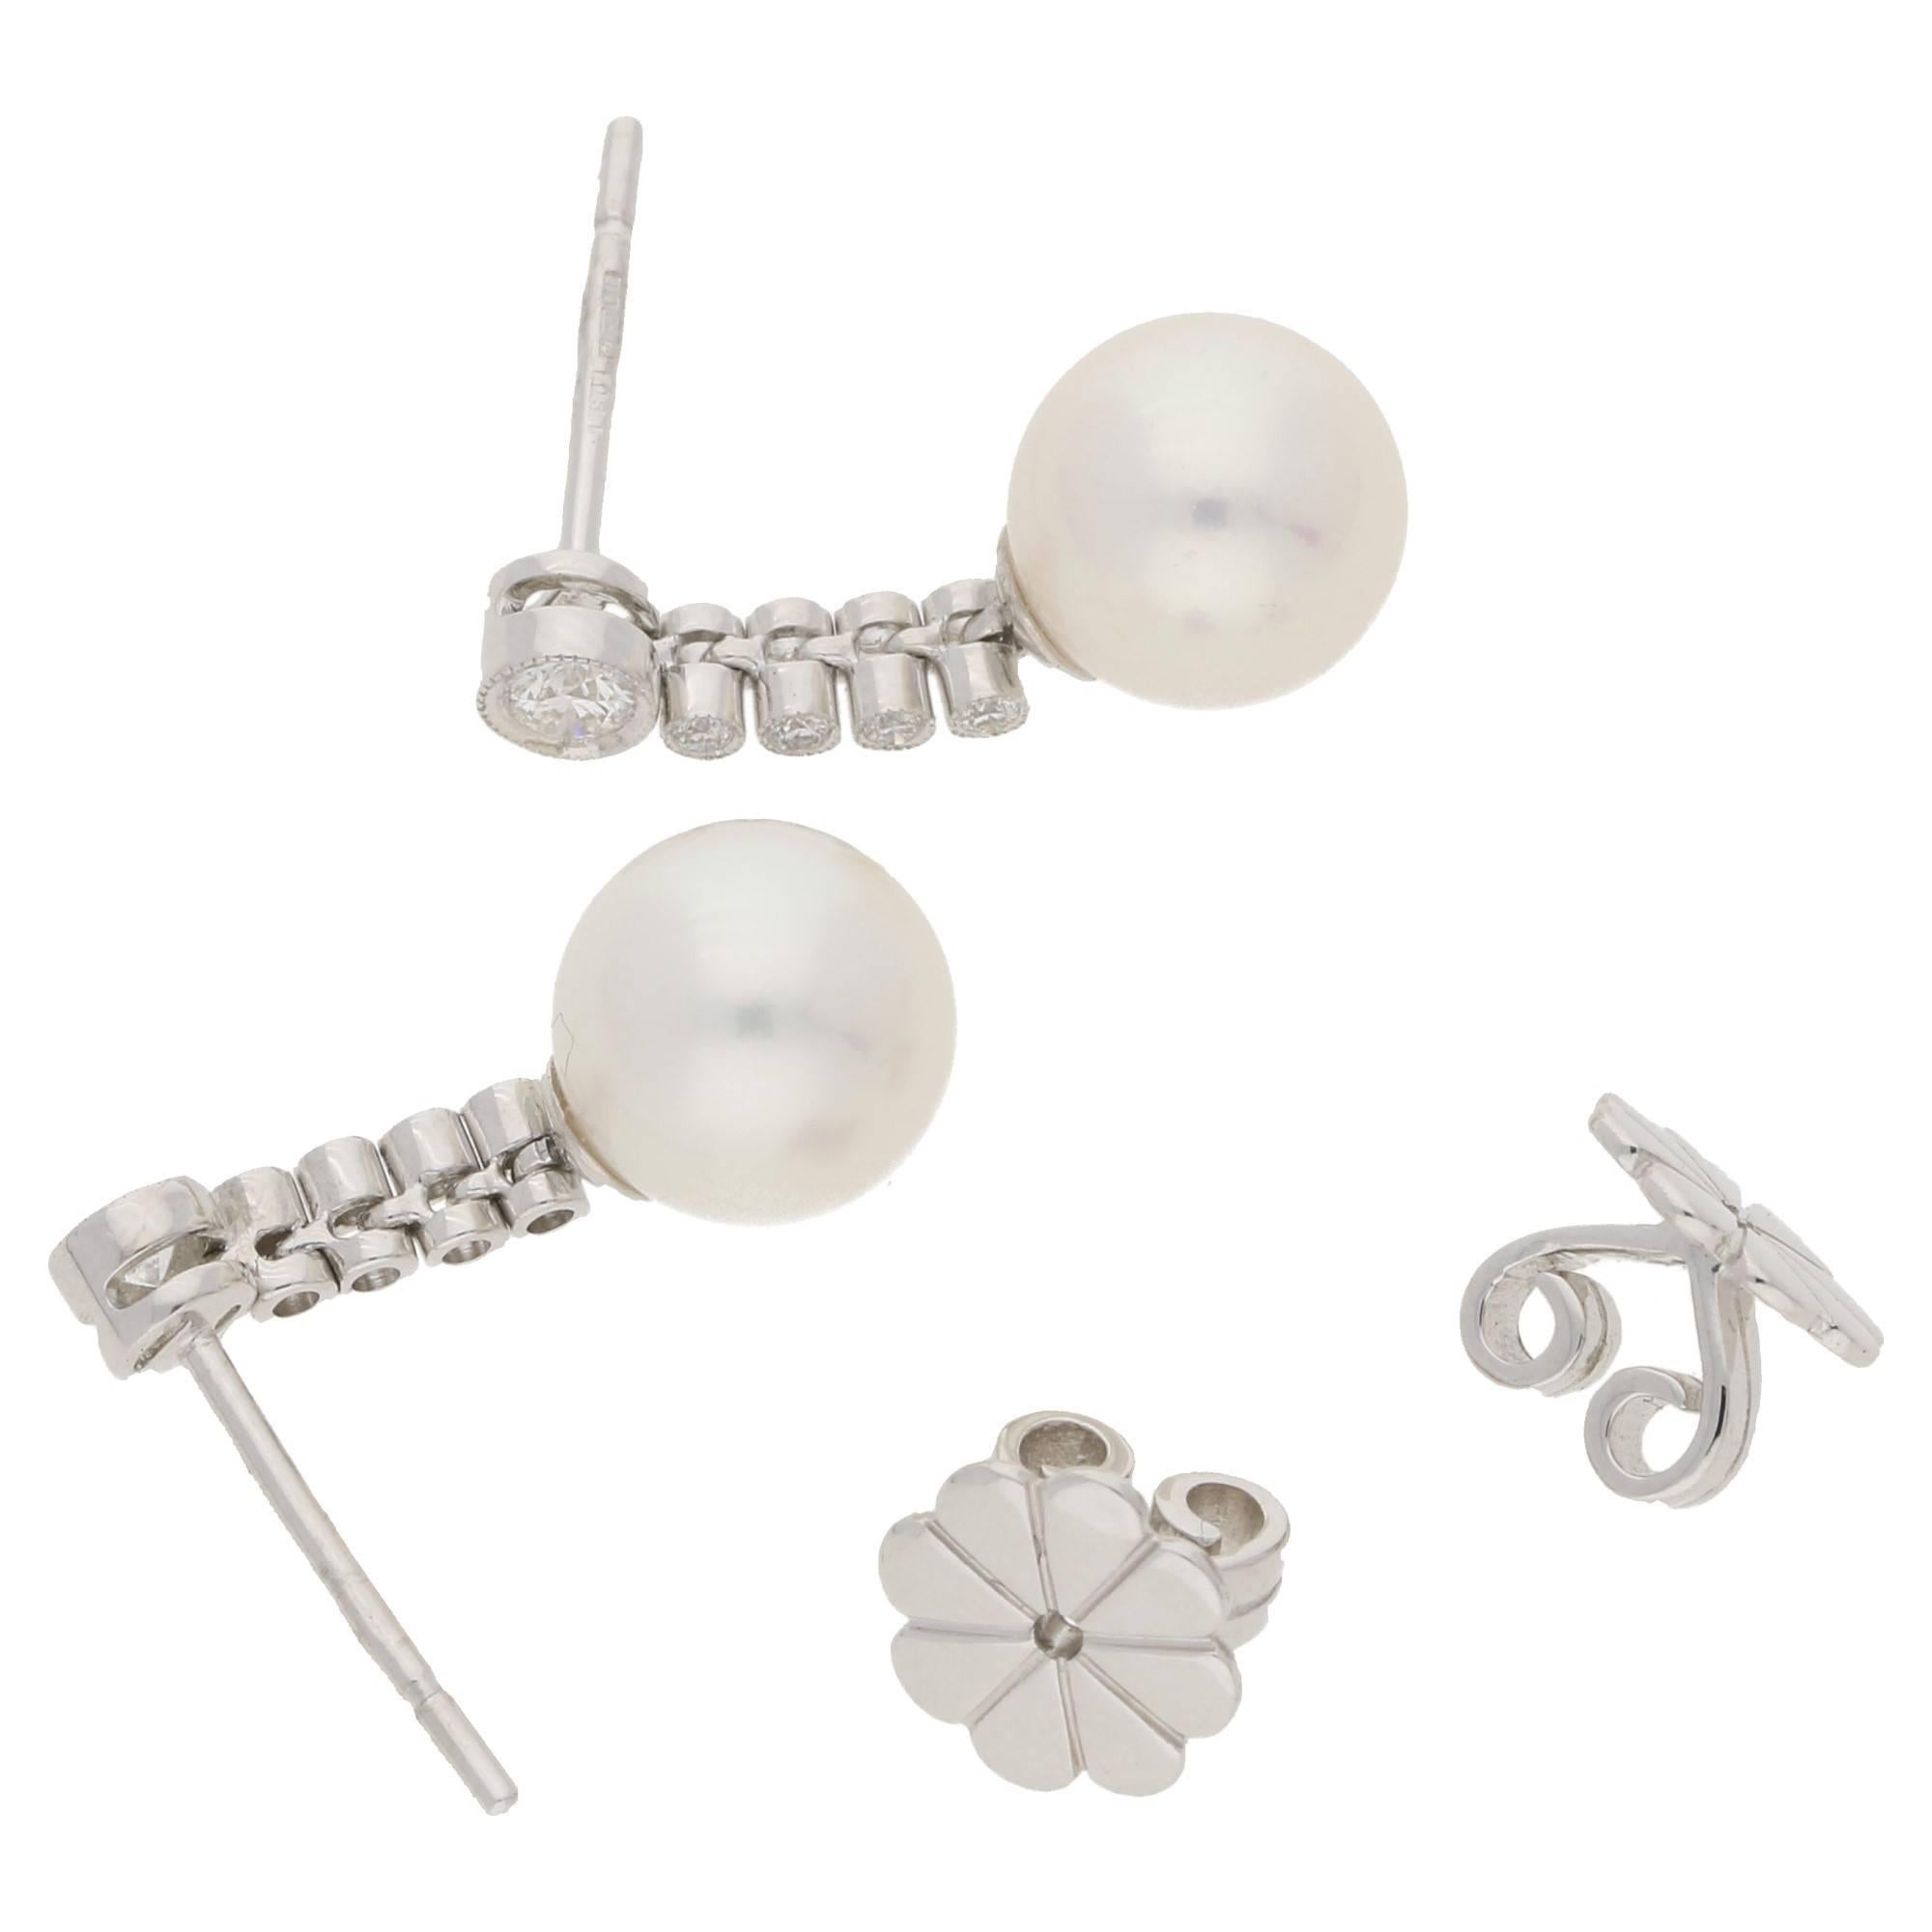 A smart and stylish pair of freshwater round pearl drop earrings, set with diamond detailing in the drop segments. The diamonds totaling 0.29cts are bezel set in 18k white gold, with delicate edge detailing. On classic post and butterfly fittings.